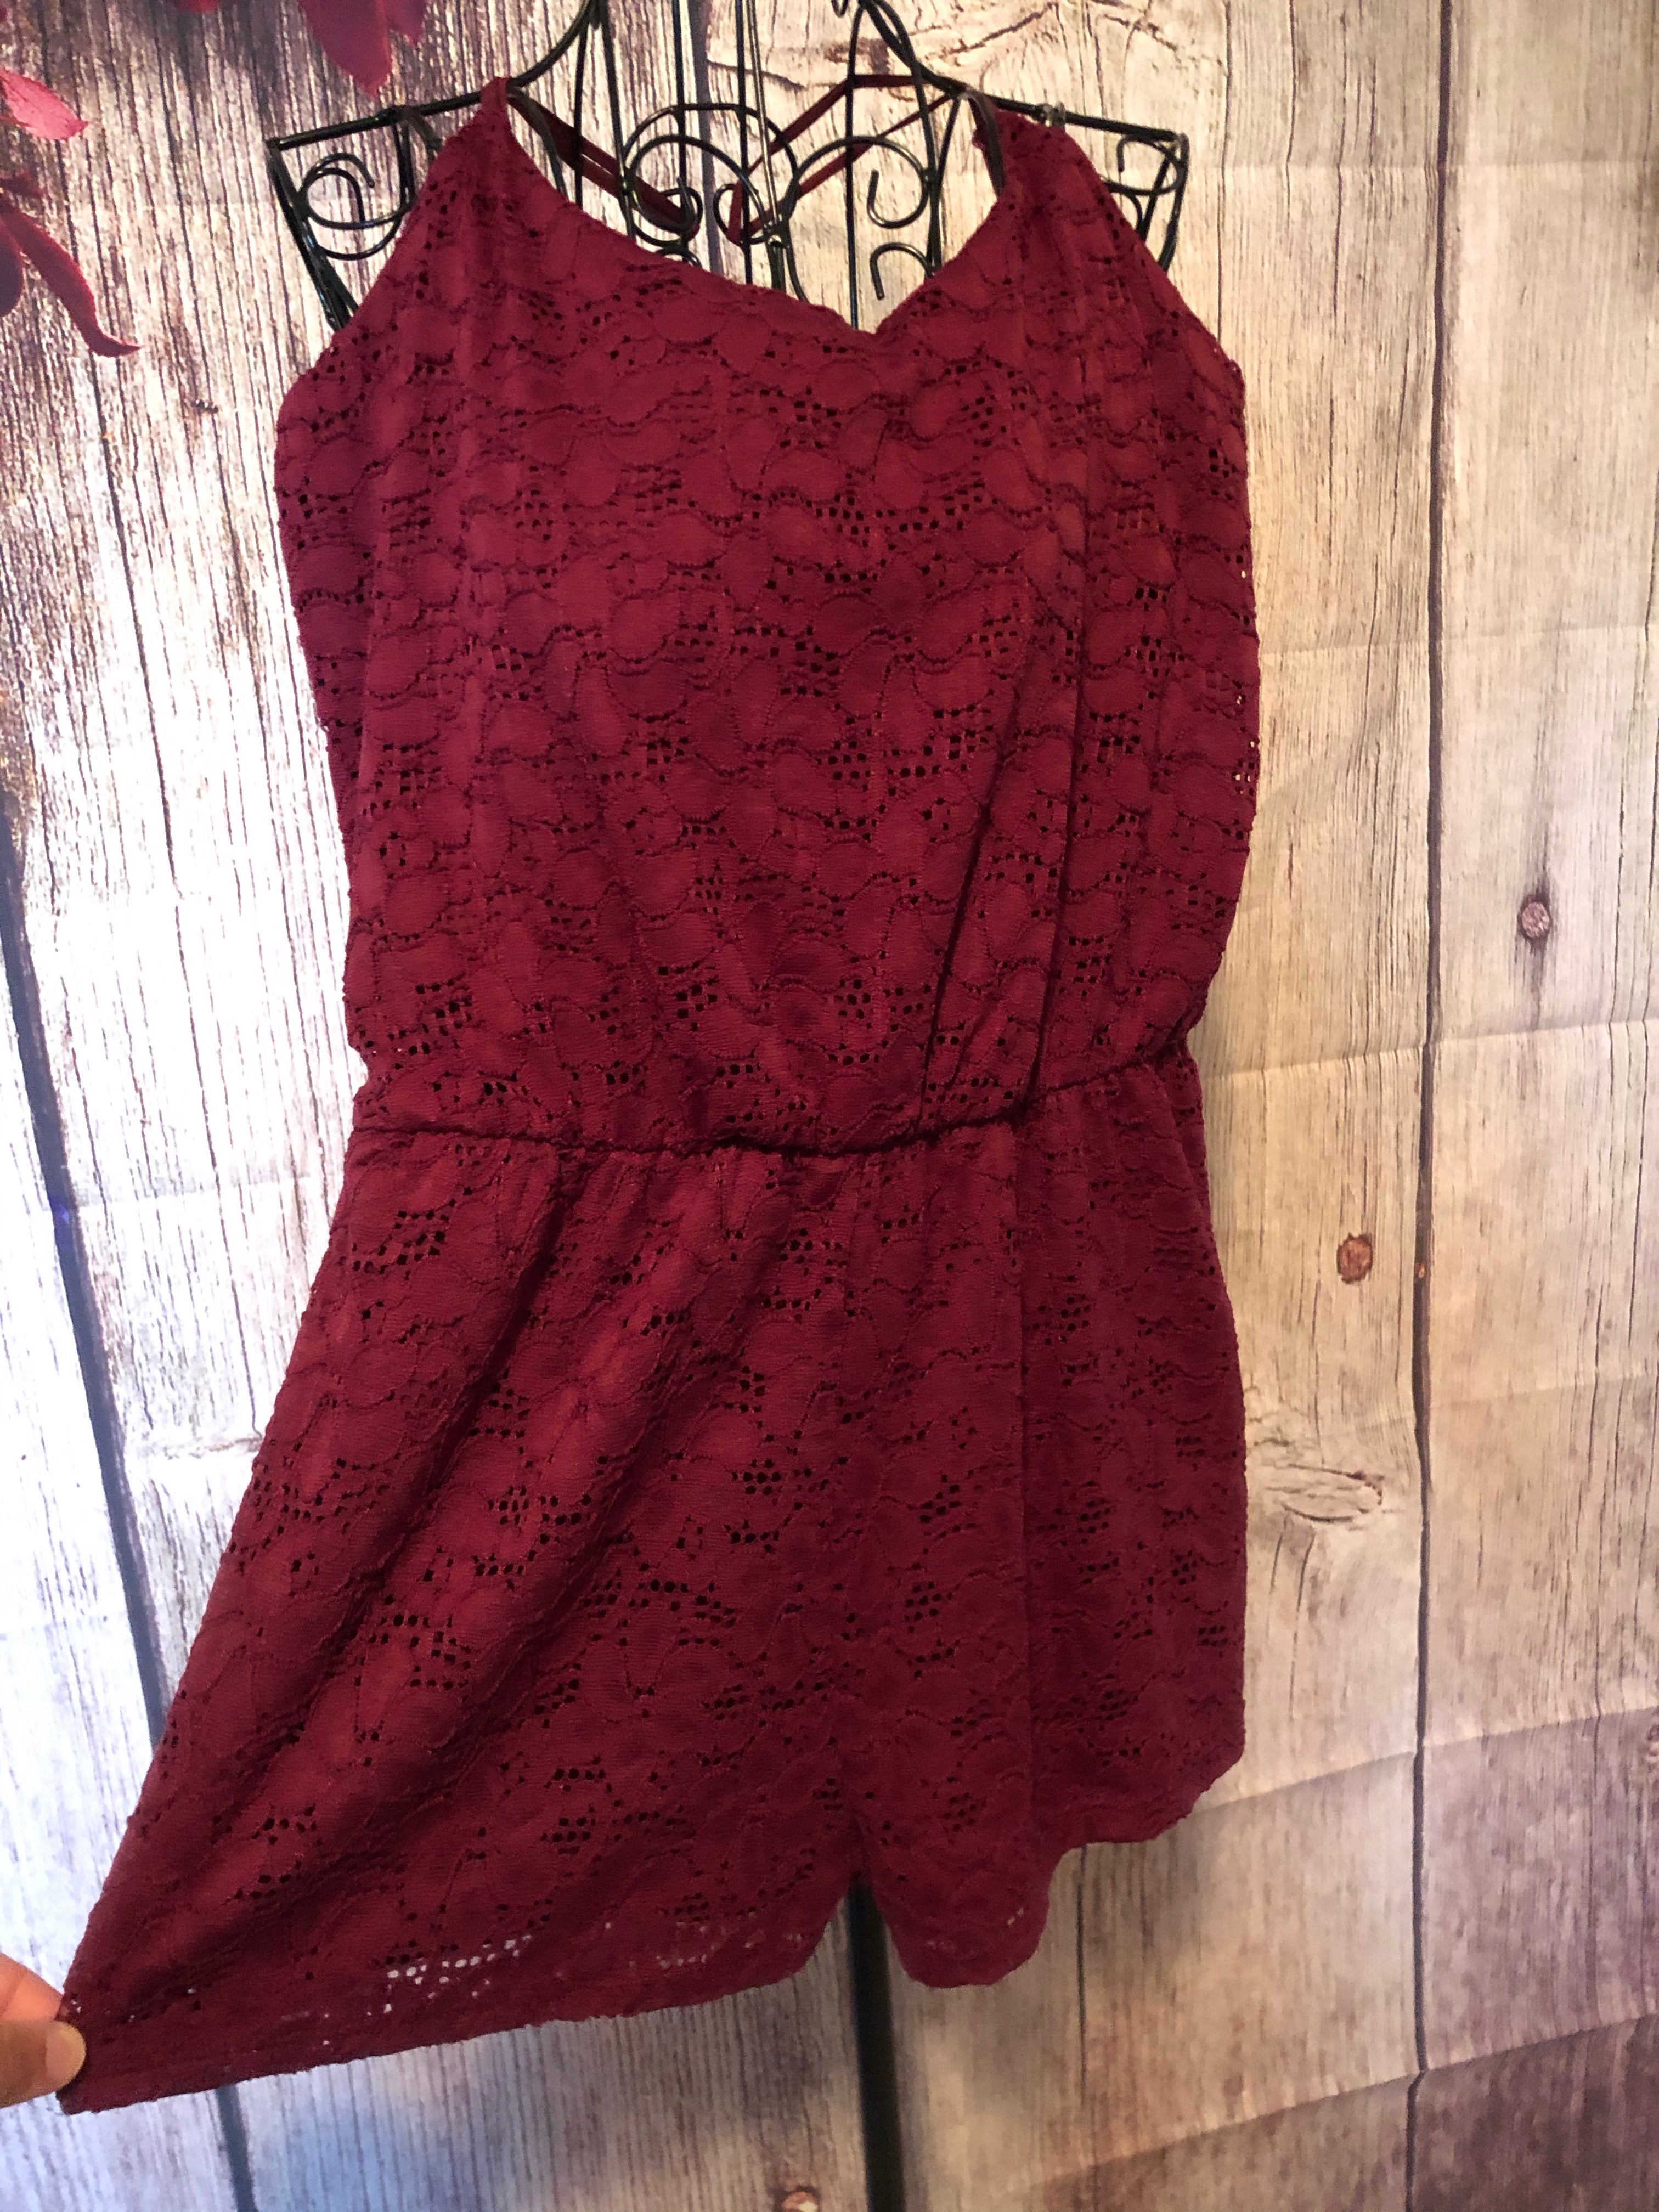 SMALL Burgundy Lace Romper